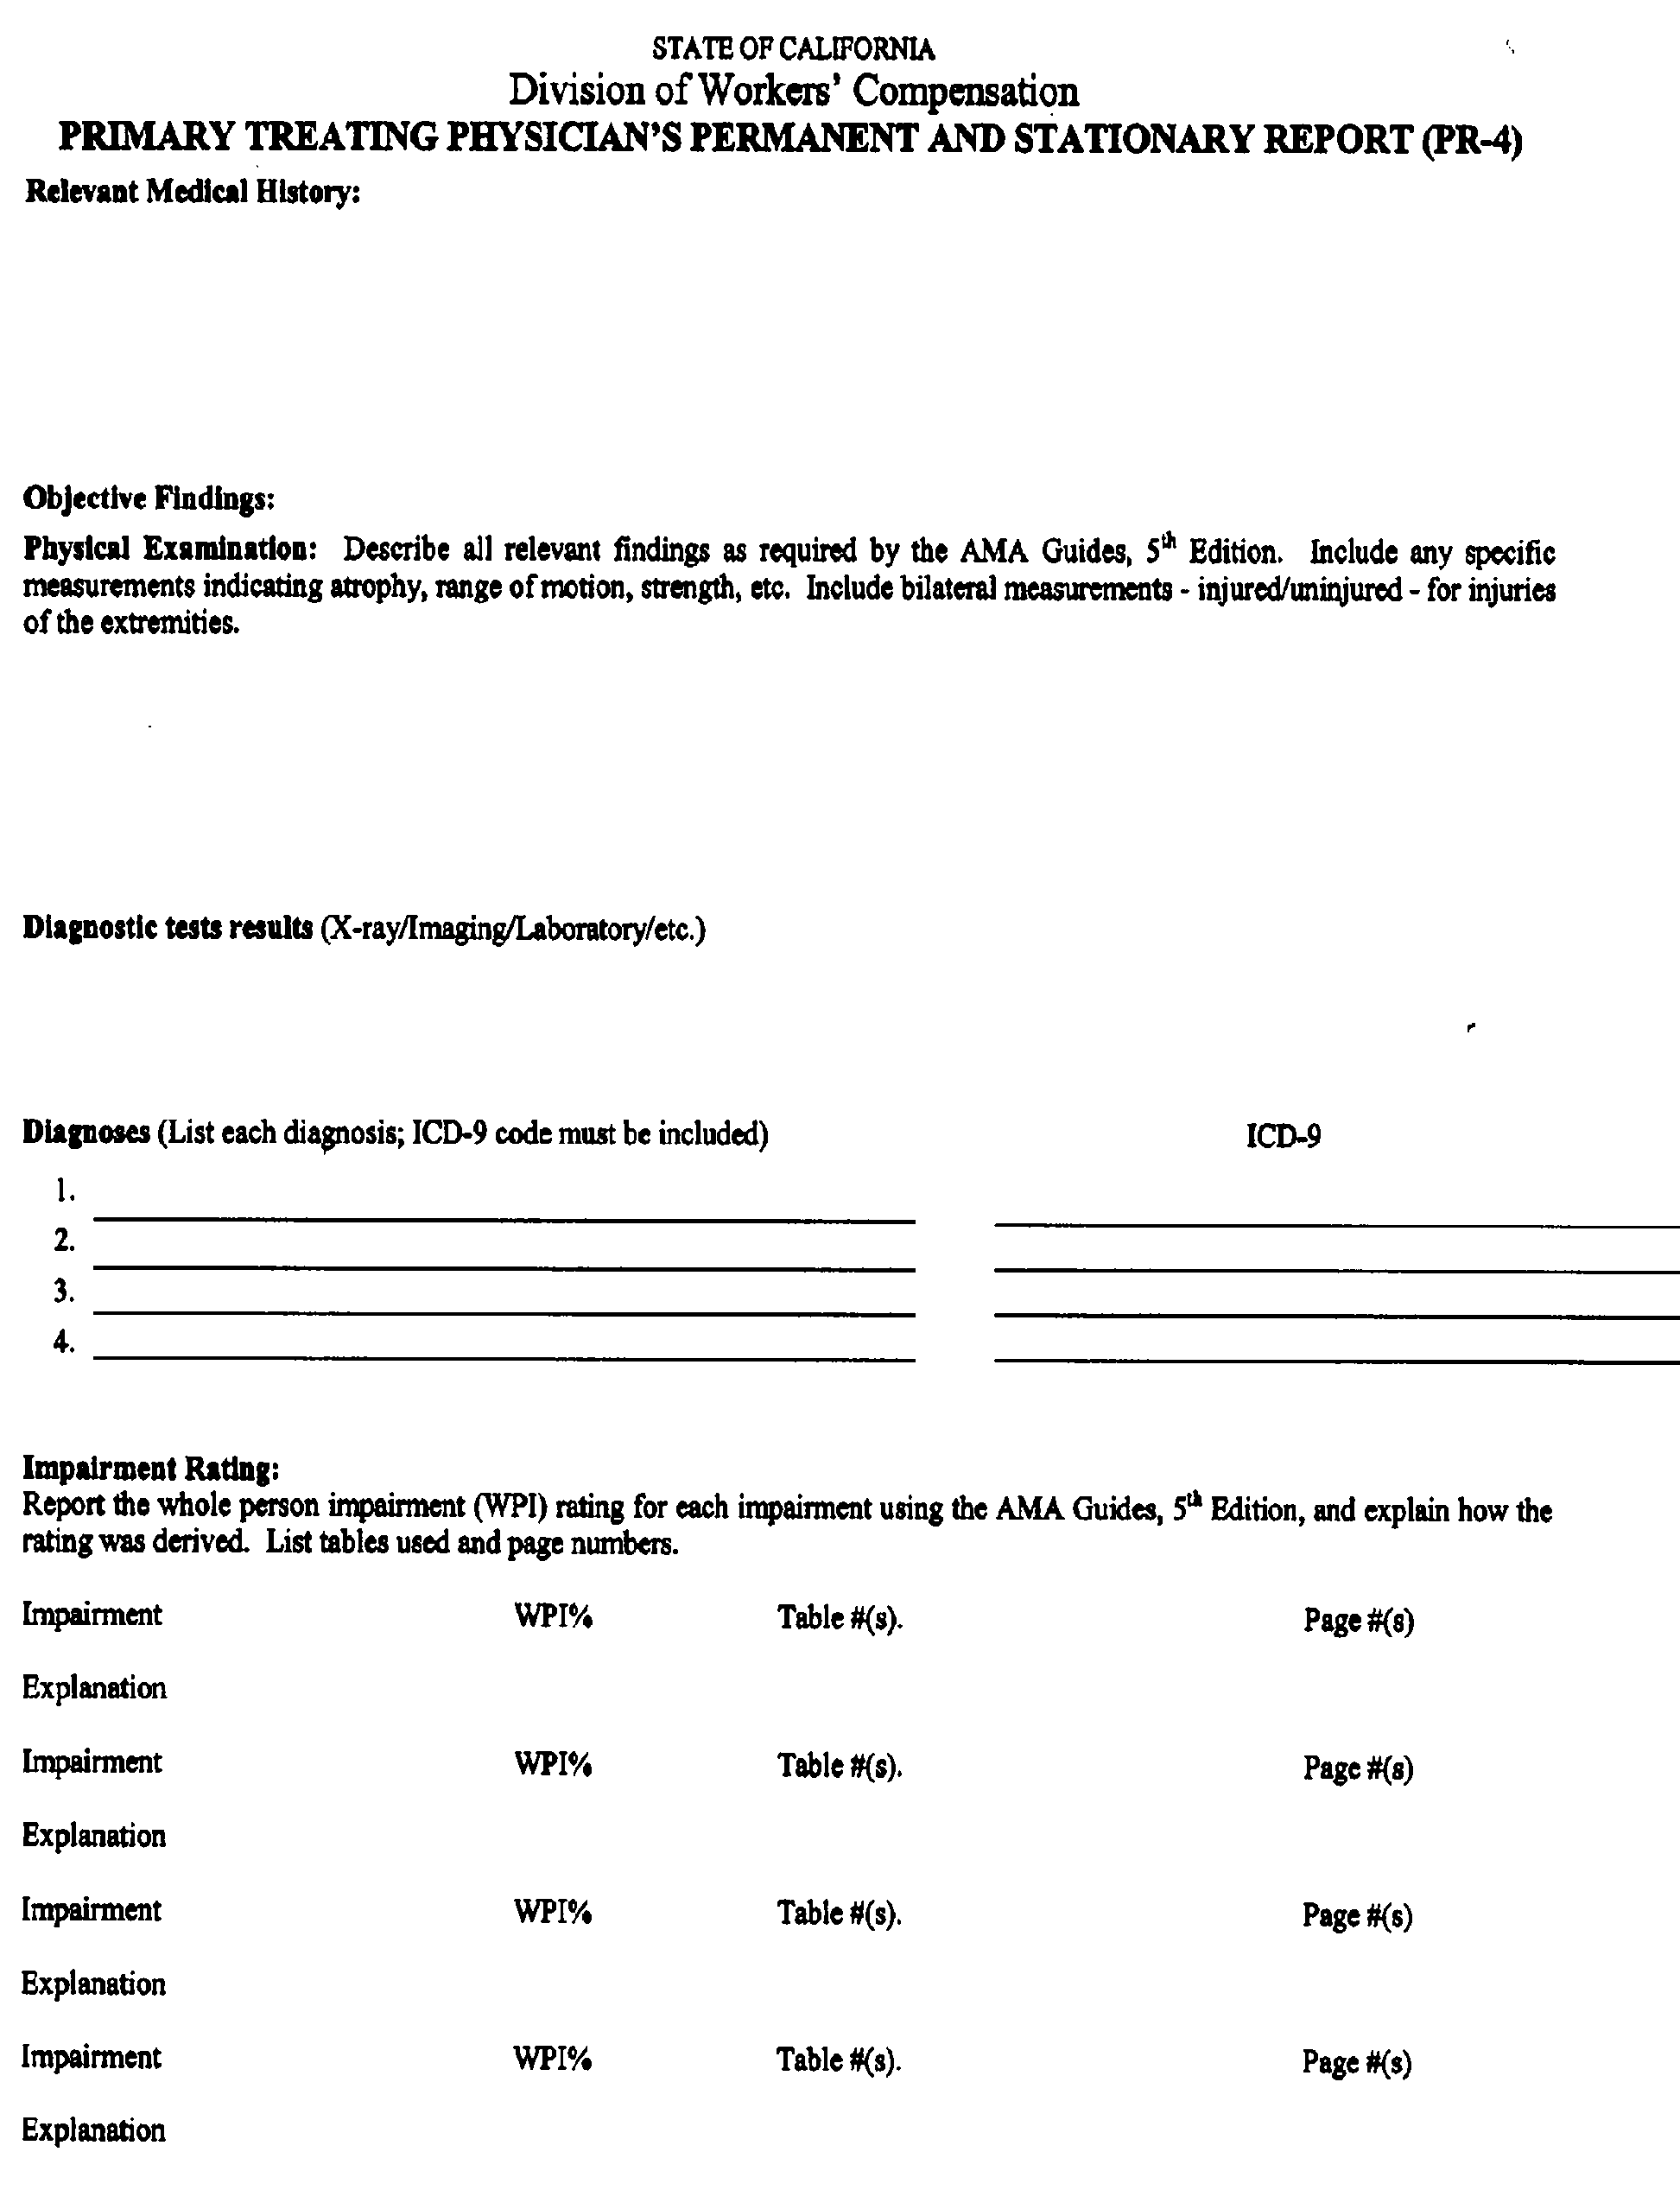 Image 2 within § 9785.4. Form PR-4 “Primary Treating Physician's Permanent and Stationary Report.”